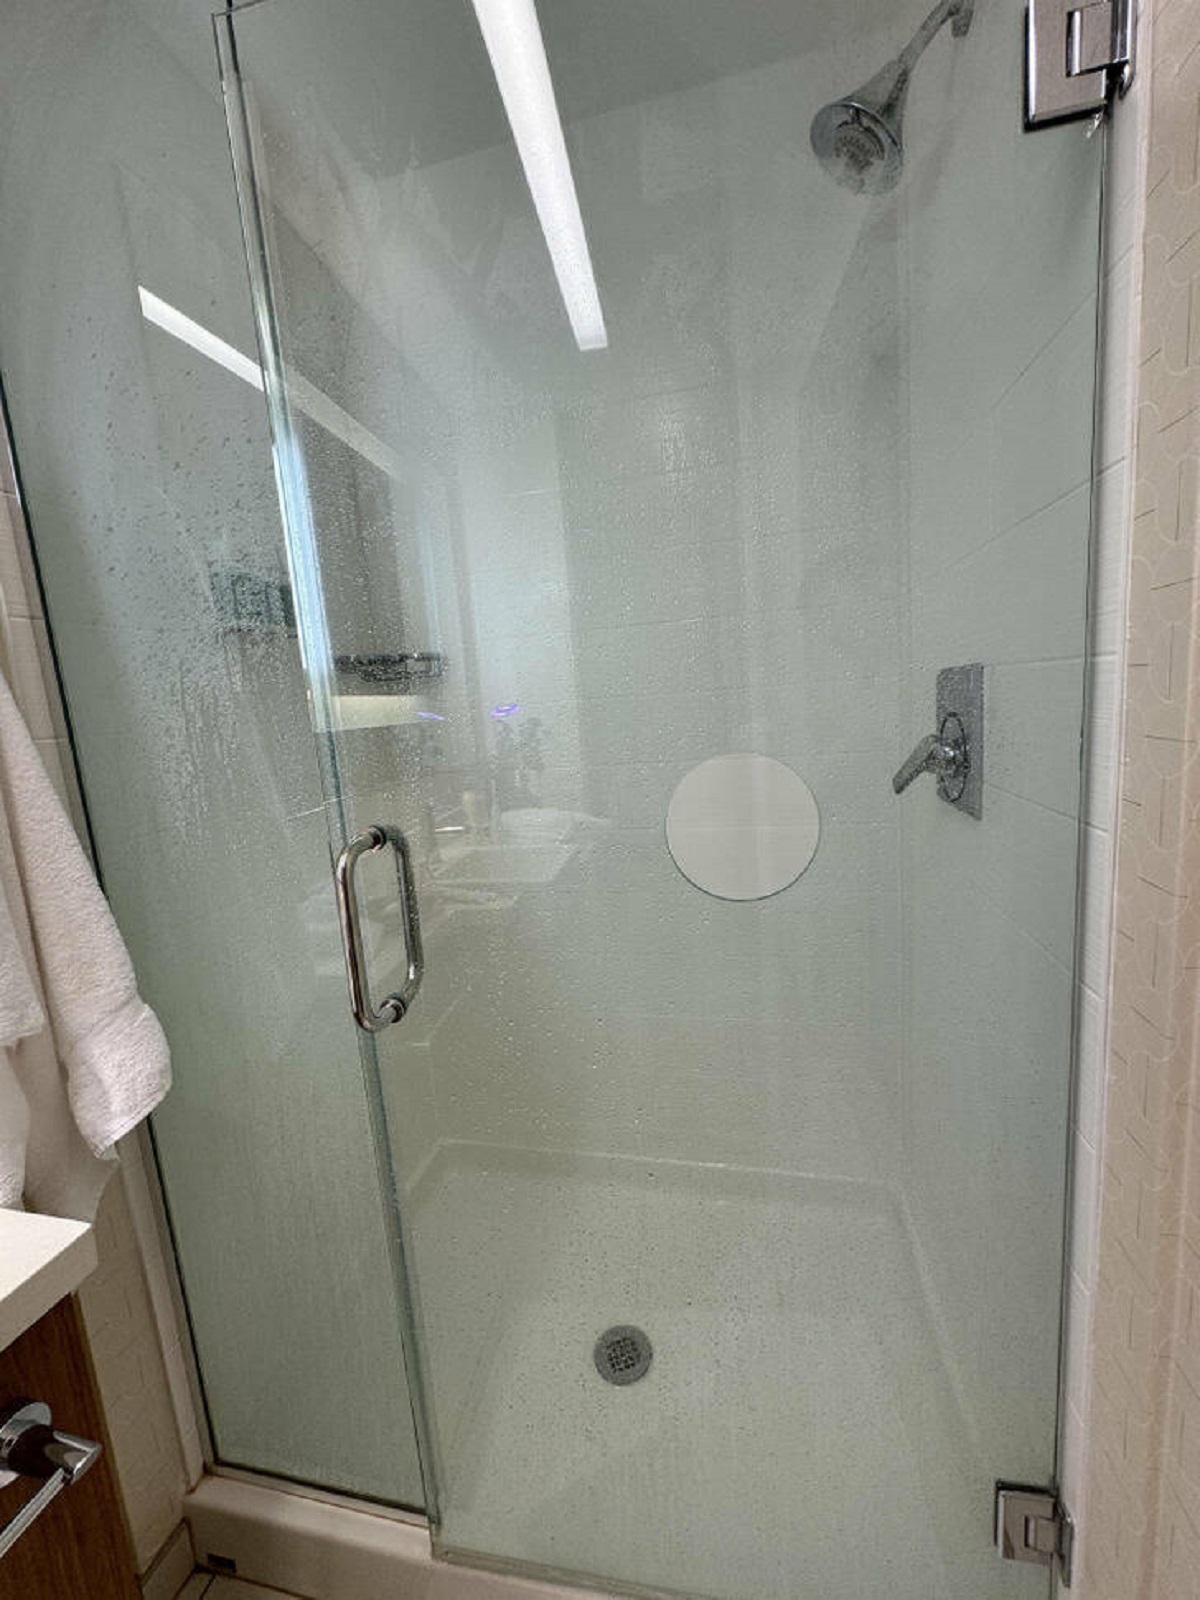 “The shower door in my hotel has a random hole in the middle.”